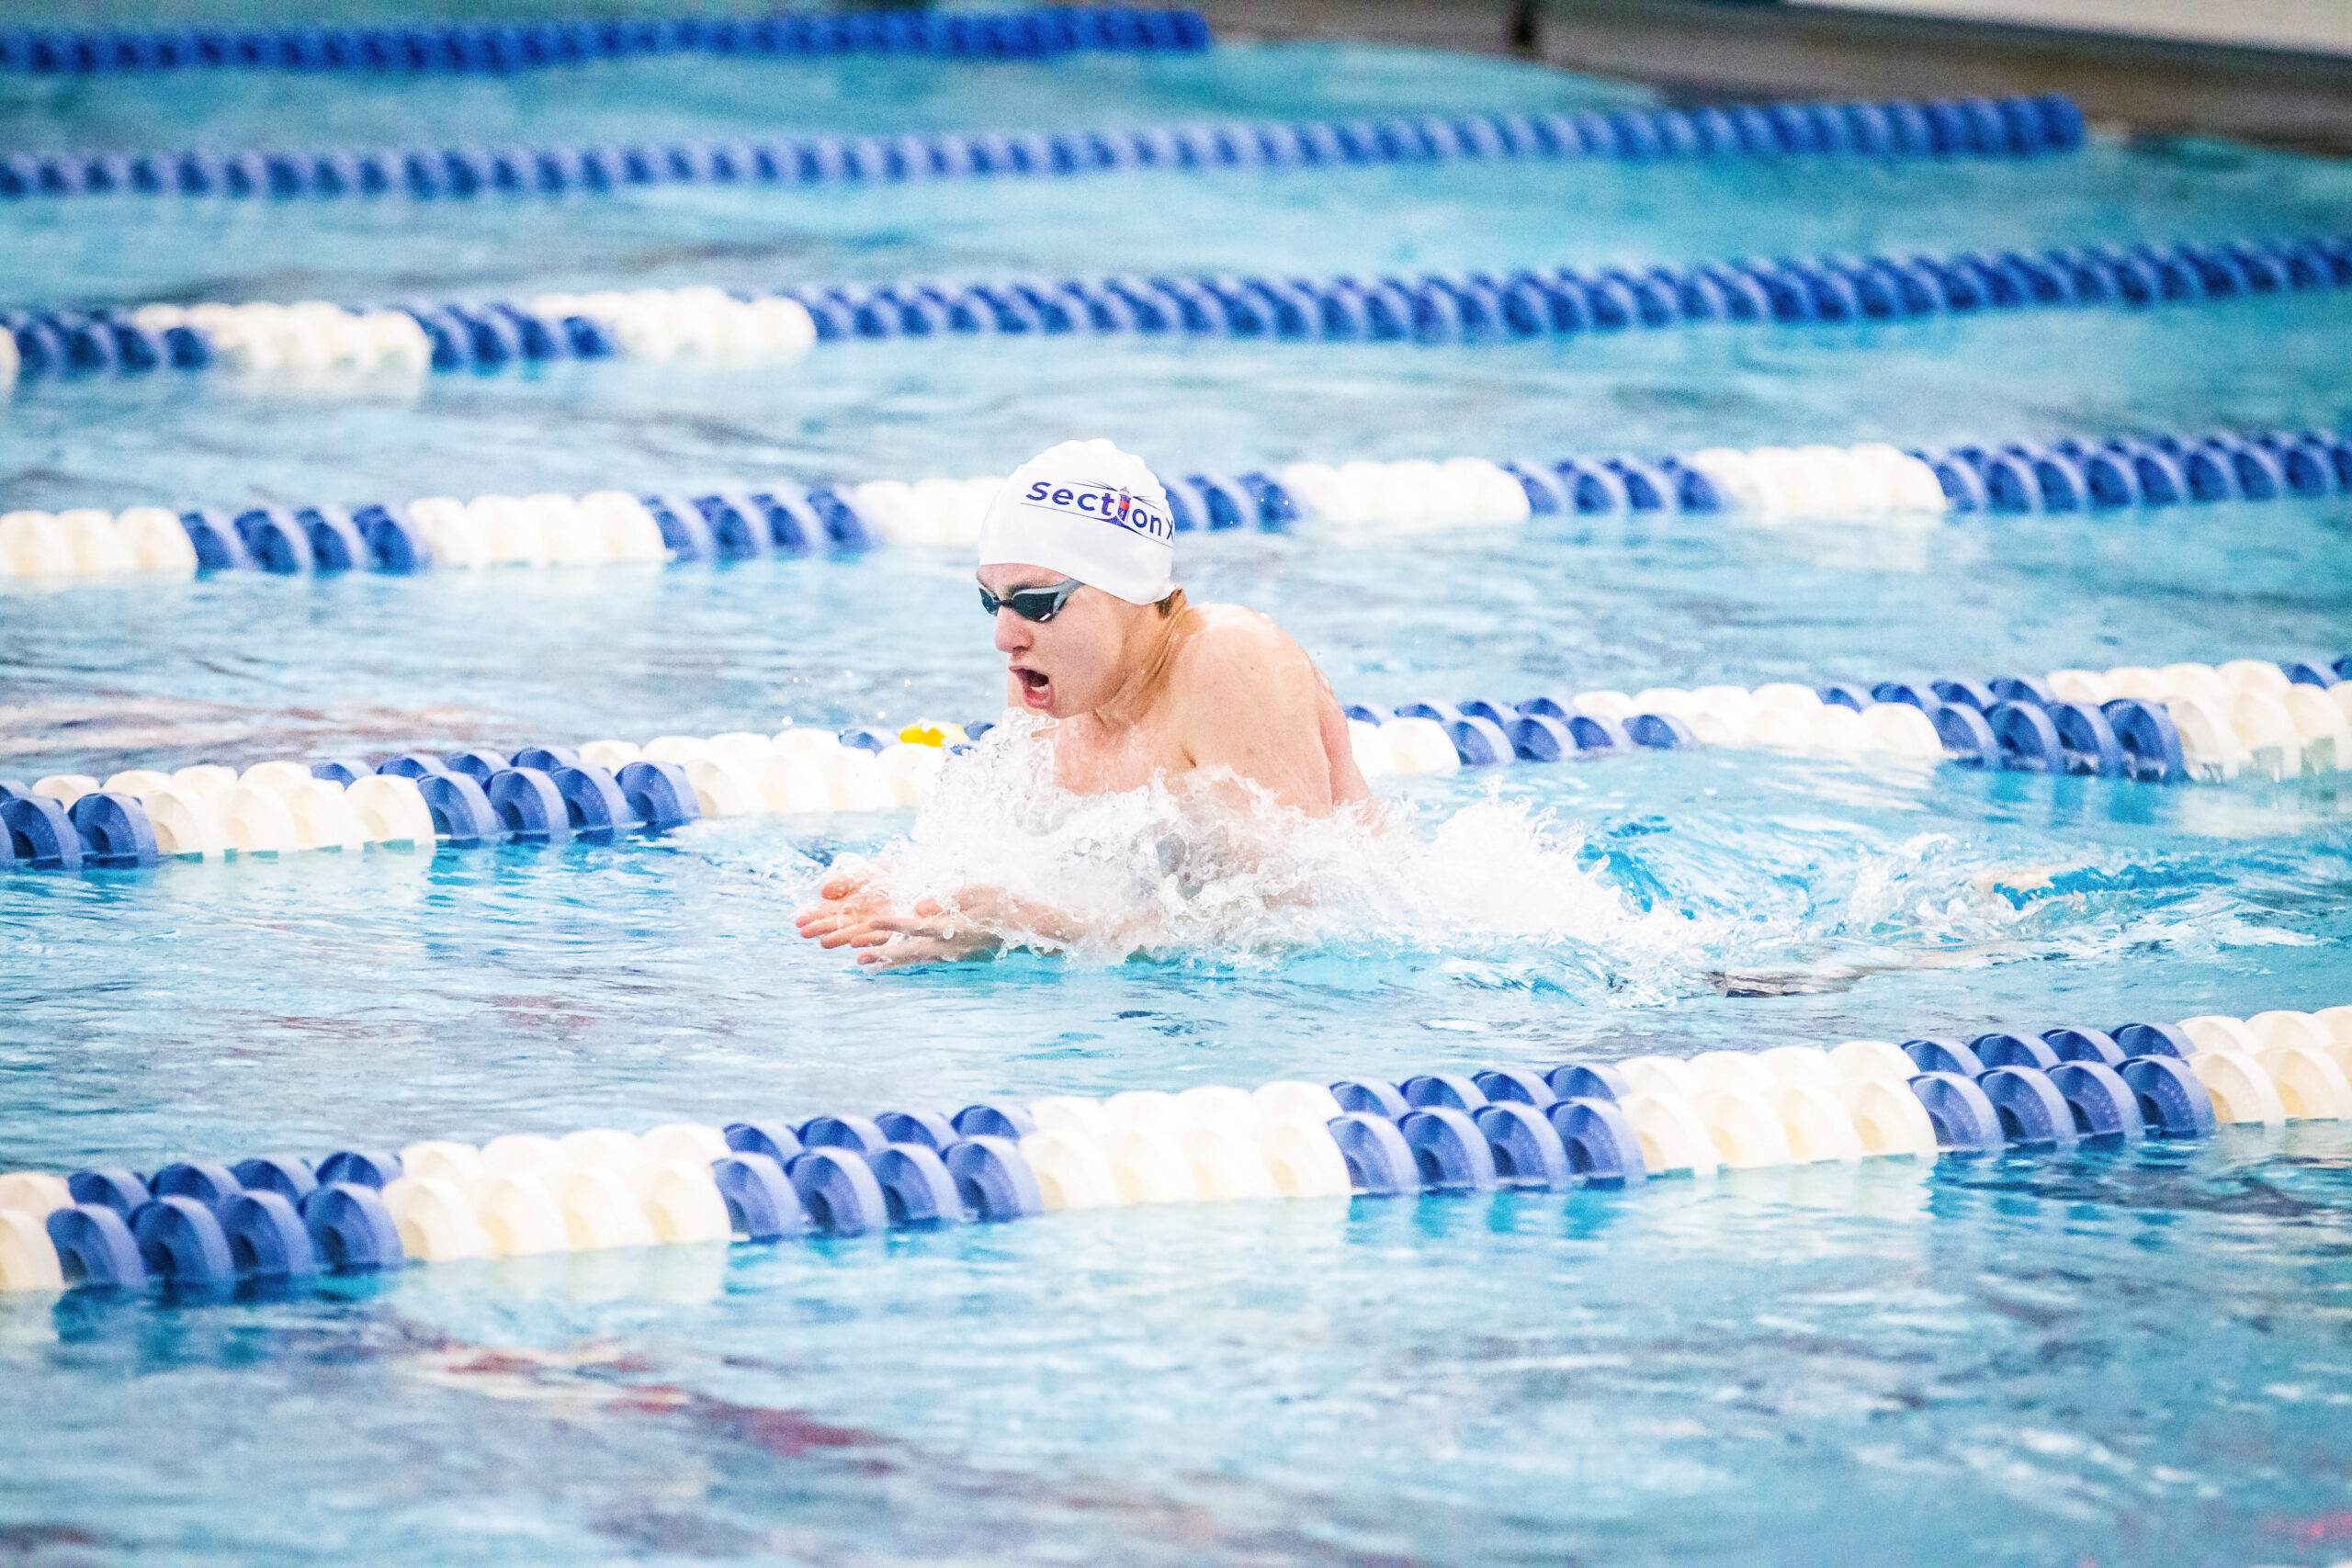 Westhampton Beach junior Max Buchen placed third among public school swimmers and fourth in the federation in the 100-yard breaststroke at the state championships March 3 and 4. DAVID WILLIAMS/BEYOND THE PRINT